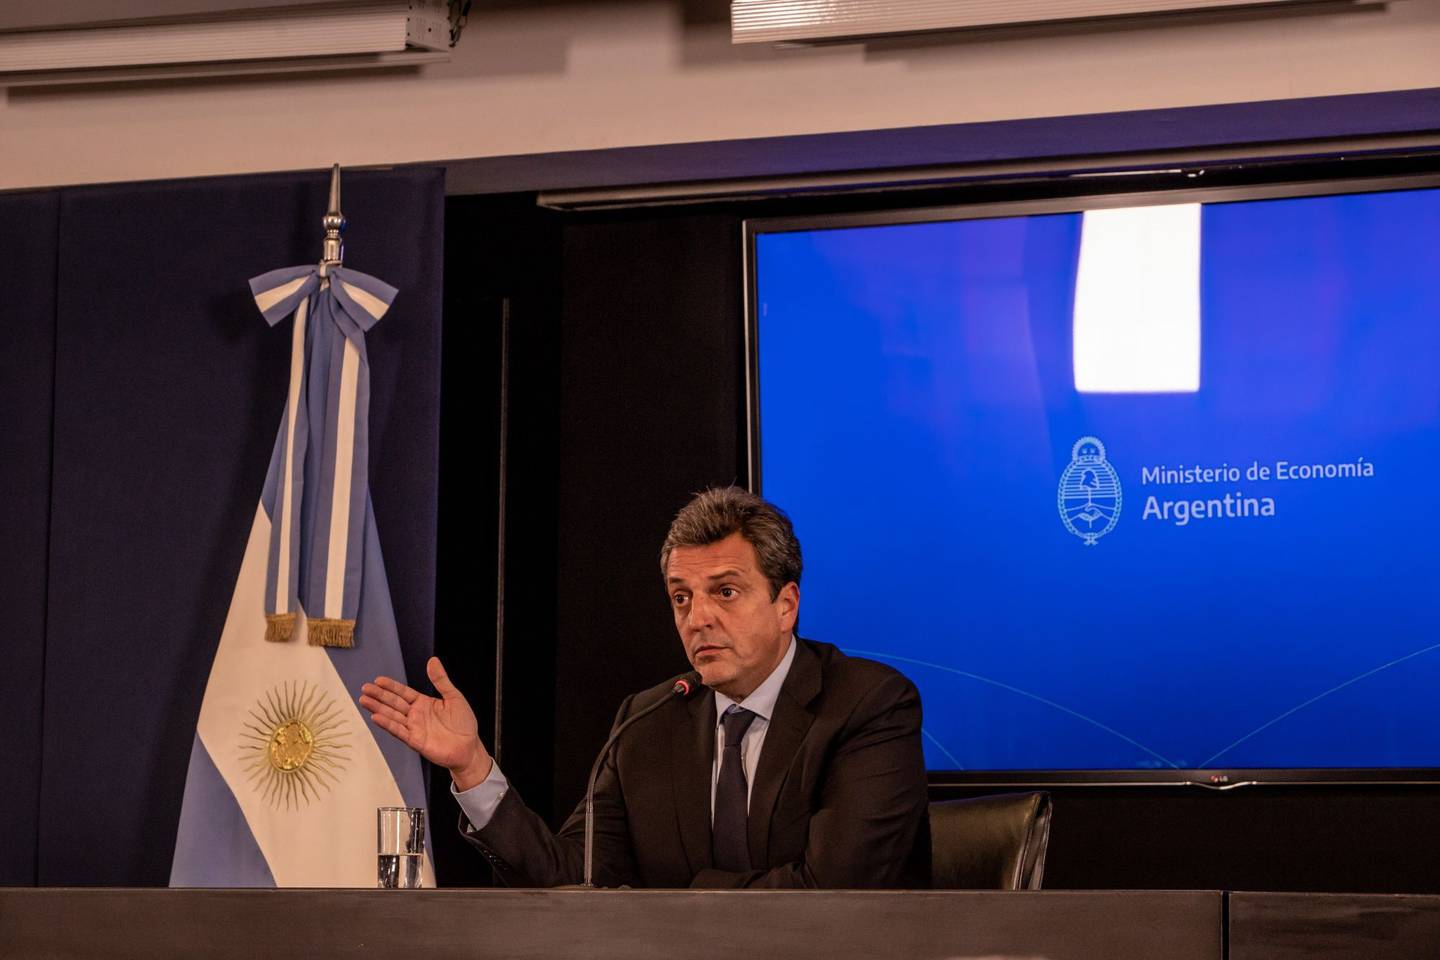 Sergio Massa, Argentina's economy minister, speaks during a press conference at the Economy Ministry building in Buenos Aires, Argentina, on Wednesday, Aug. 3, 2022. New Economy Minister Massa is preparing a set of measures to address one of Argentinas key